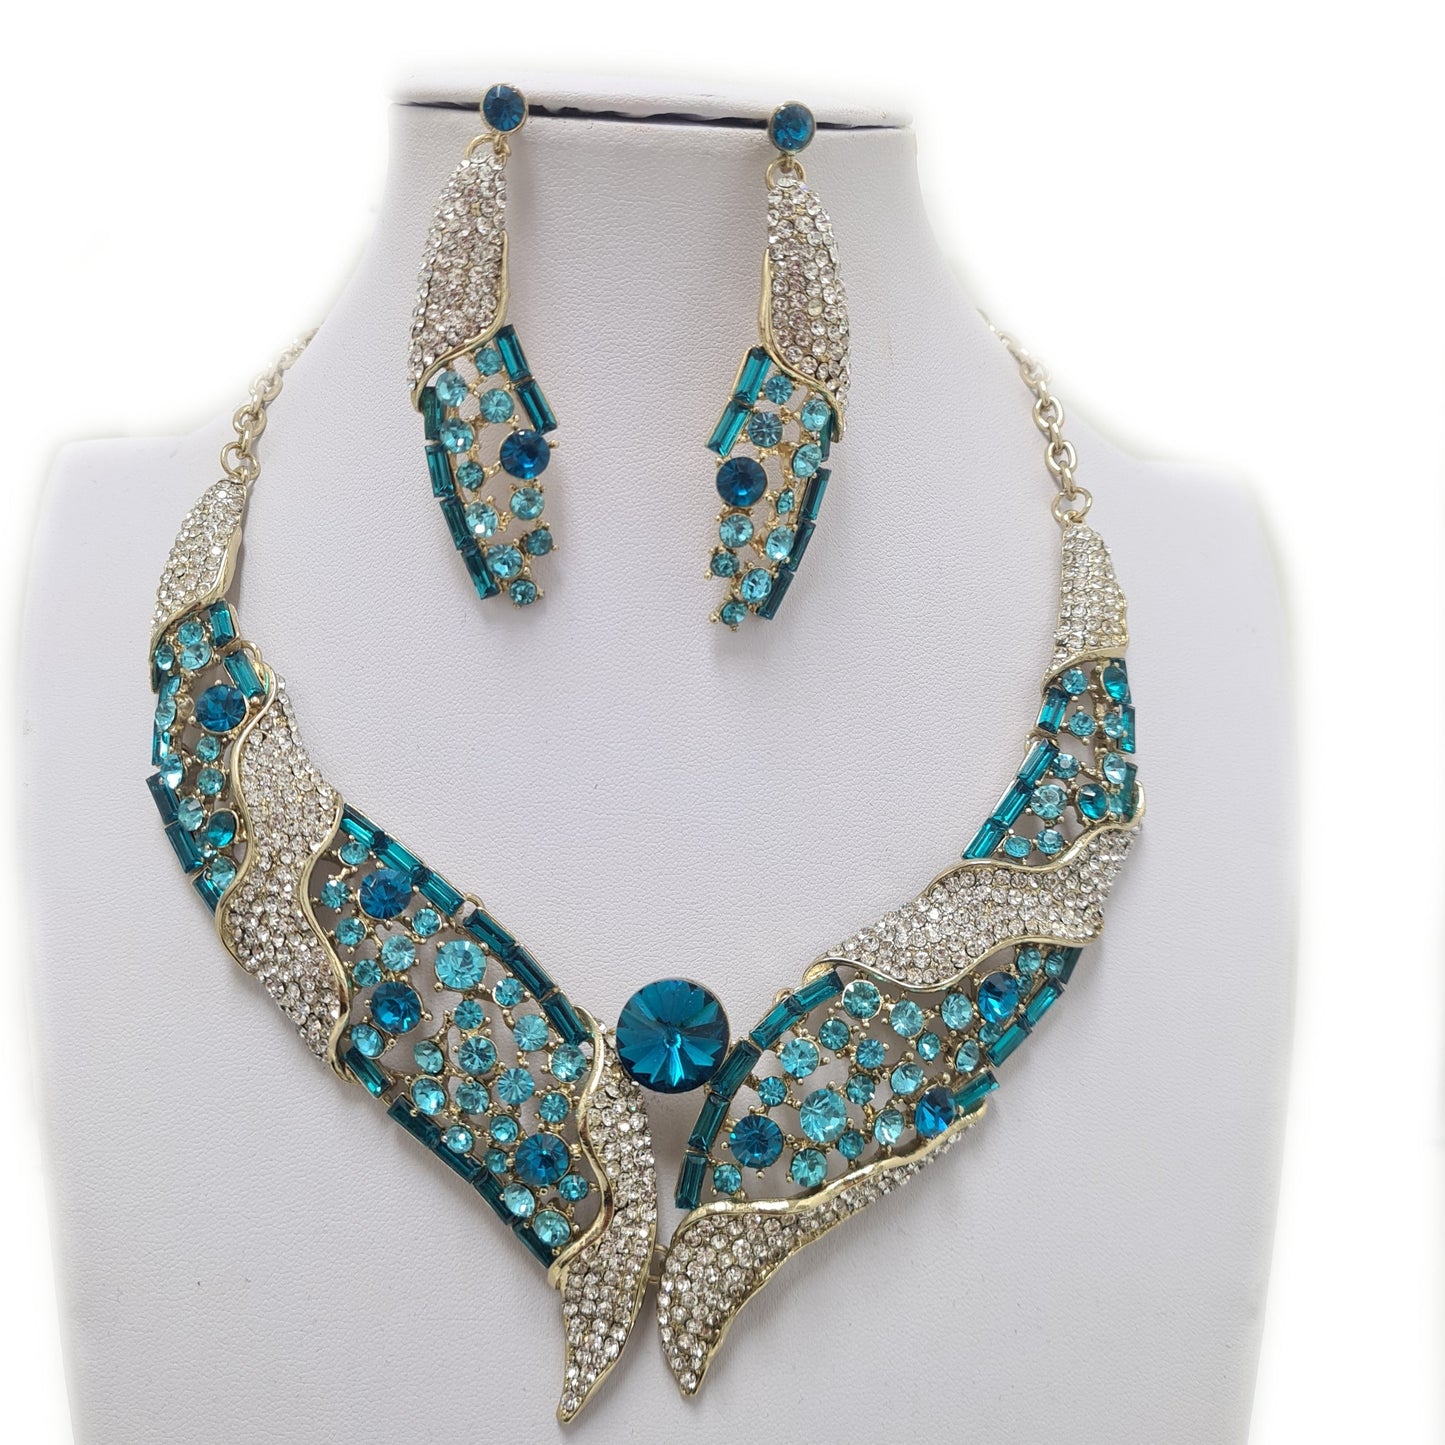 Blue and Silver Rhinestone Necklace Set